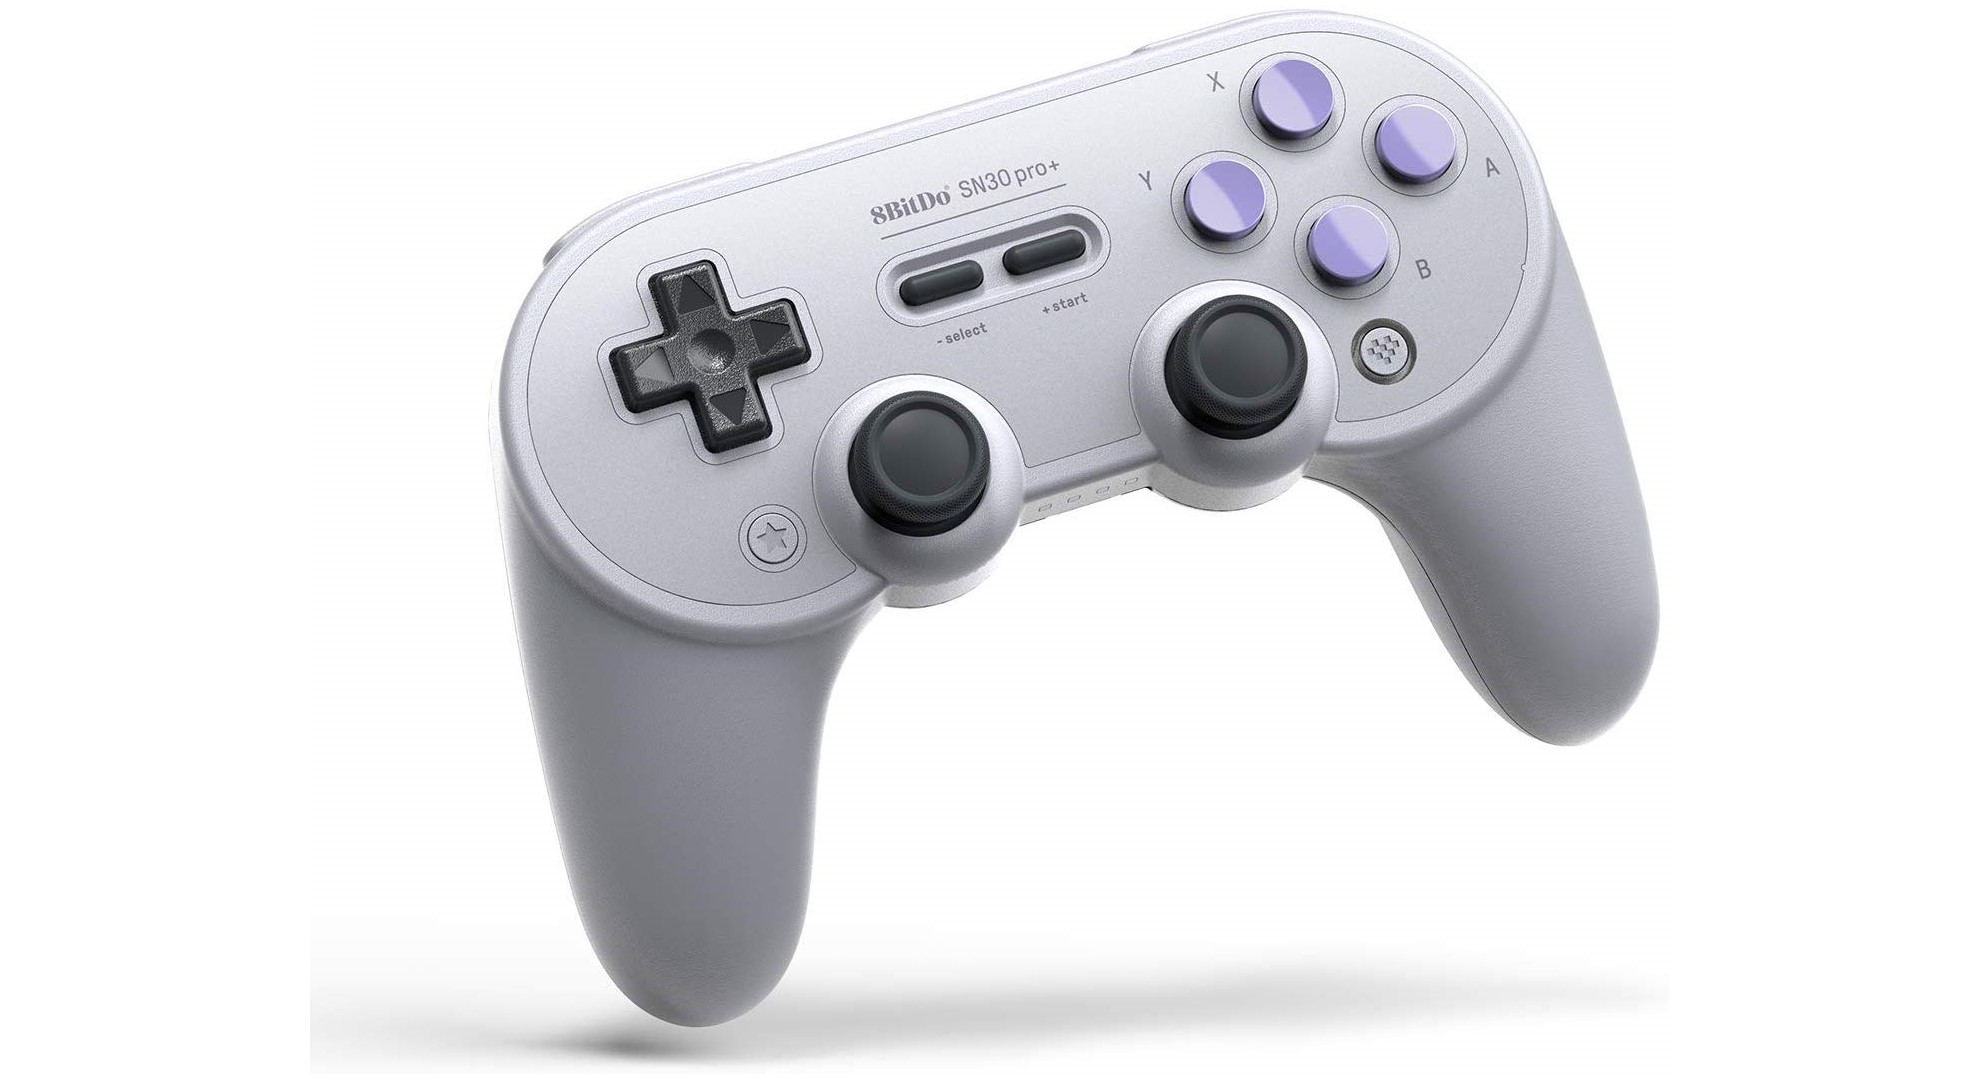 Best PC game controllers: 8BitDo SN30 Pro